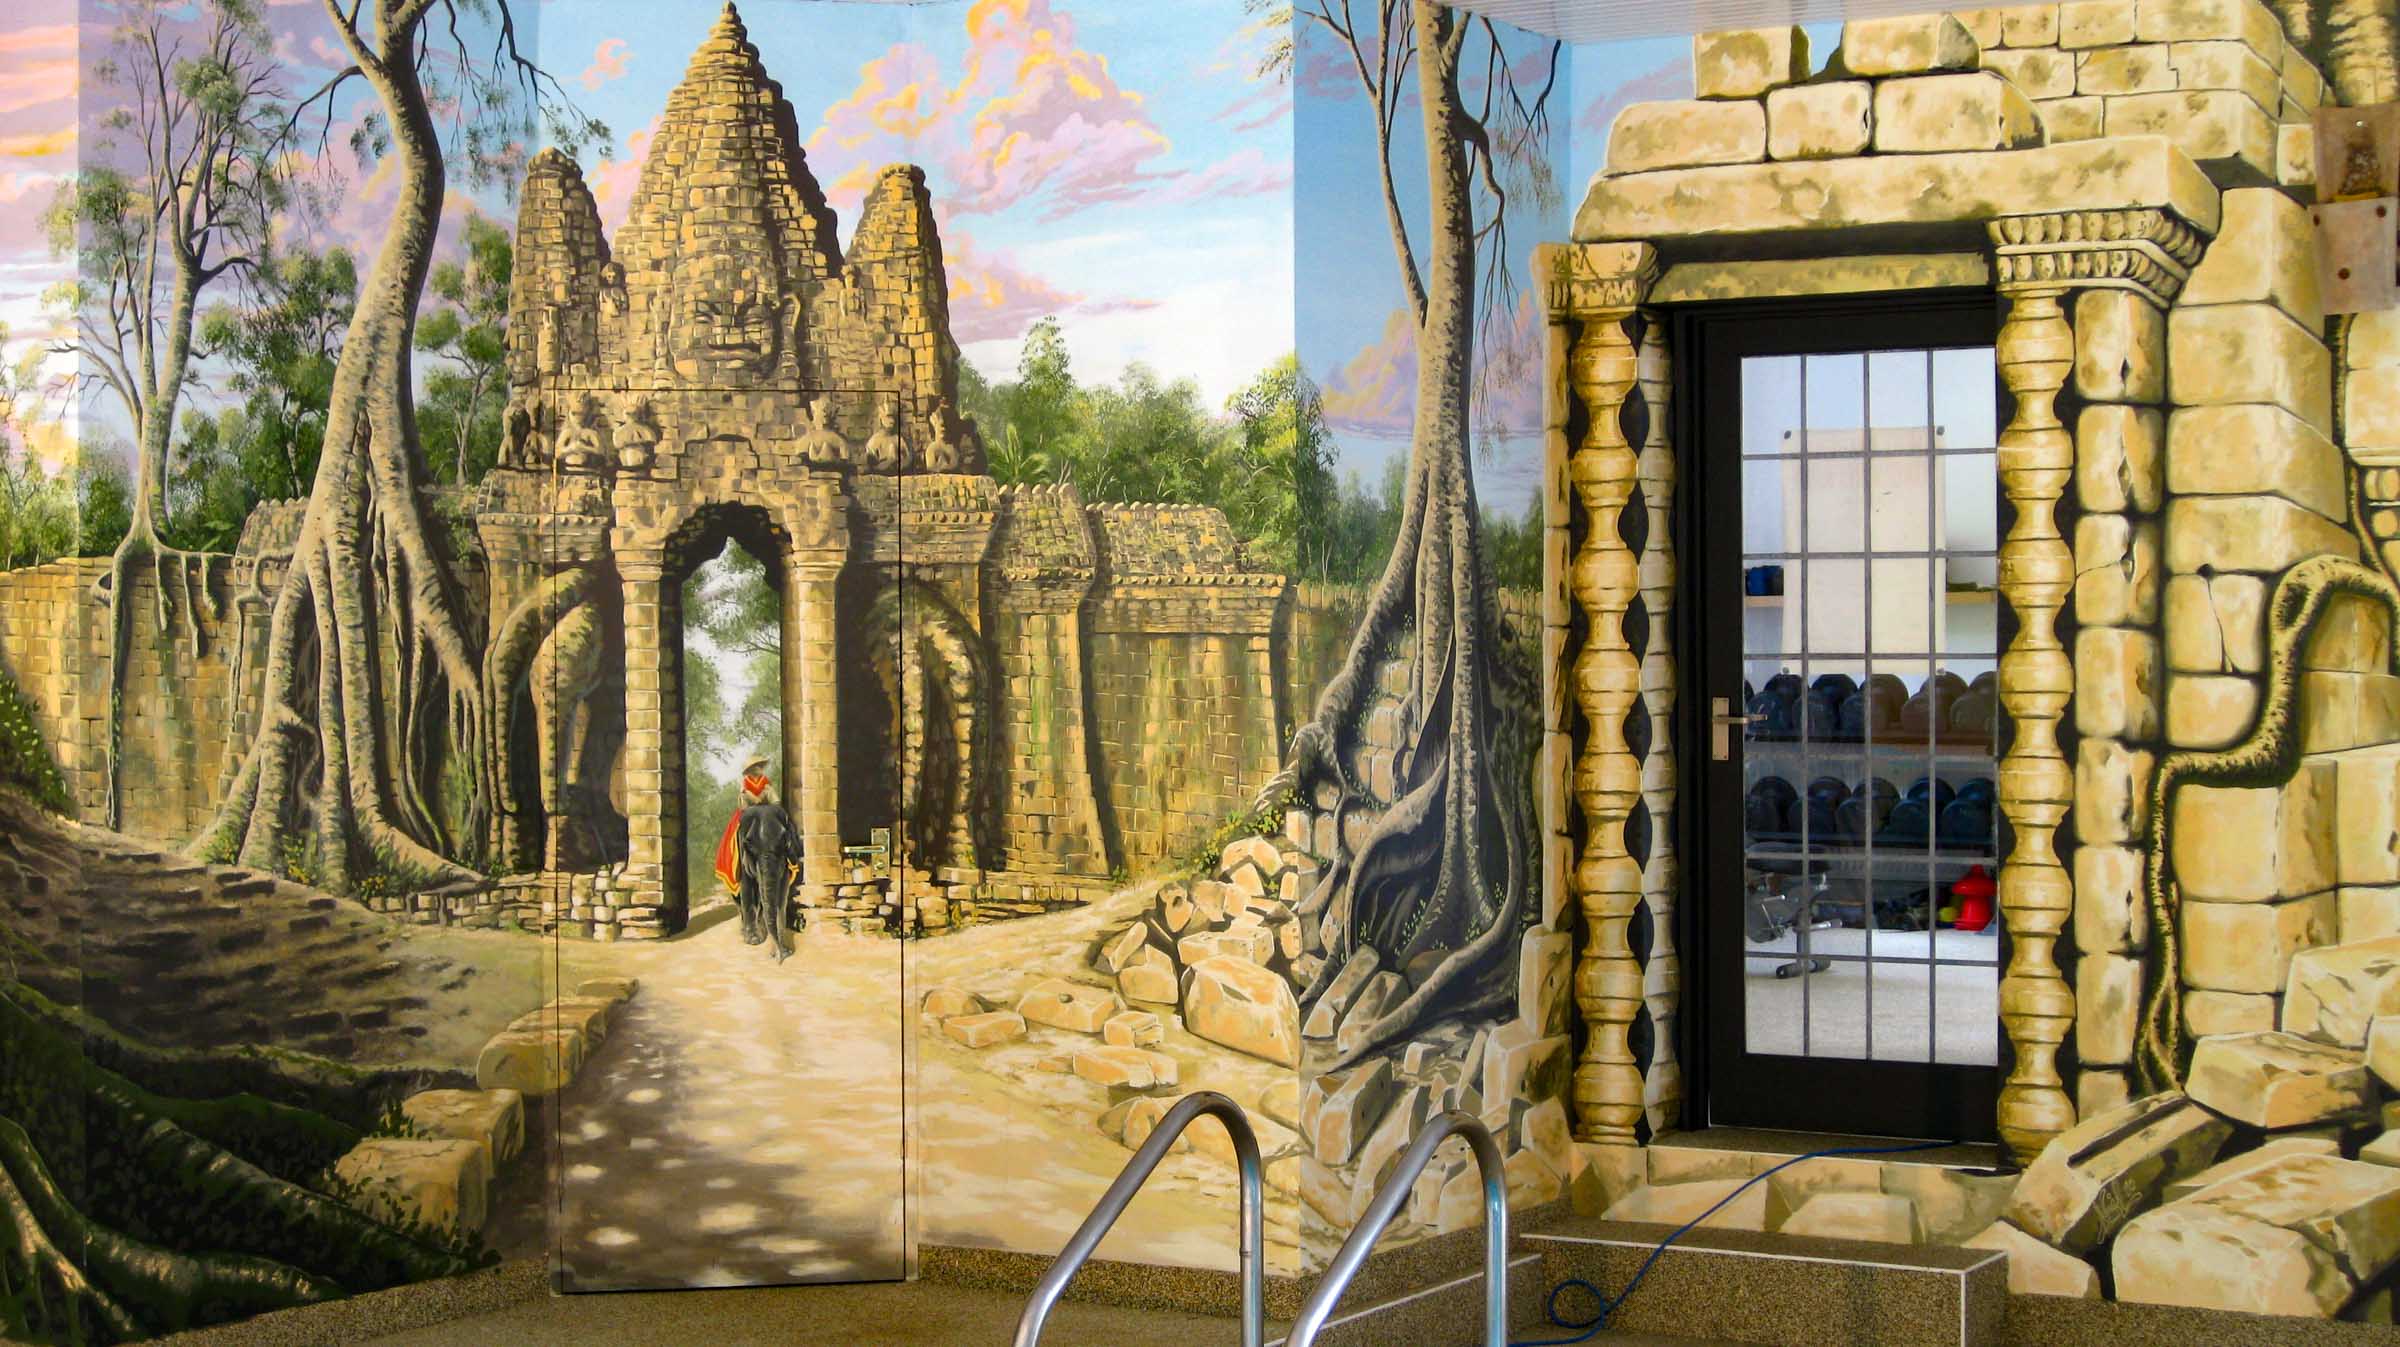 Another Ta Prohm Gate and more giant trees adorn the new changing area of this Angkor Wat Pool Mural